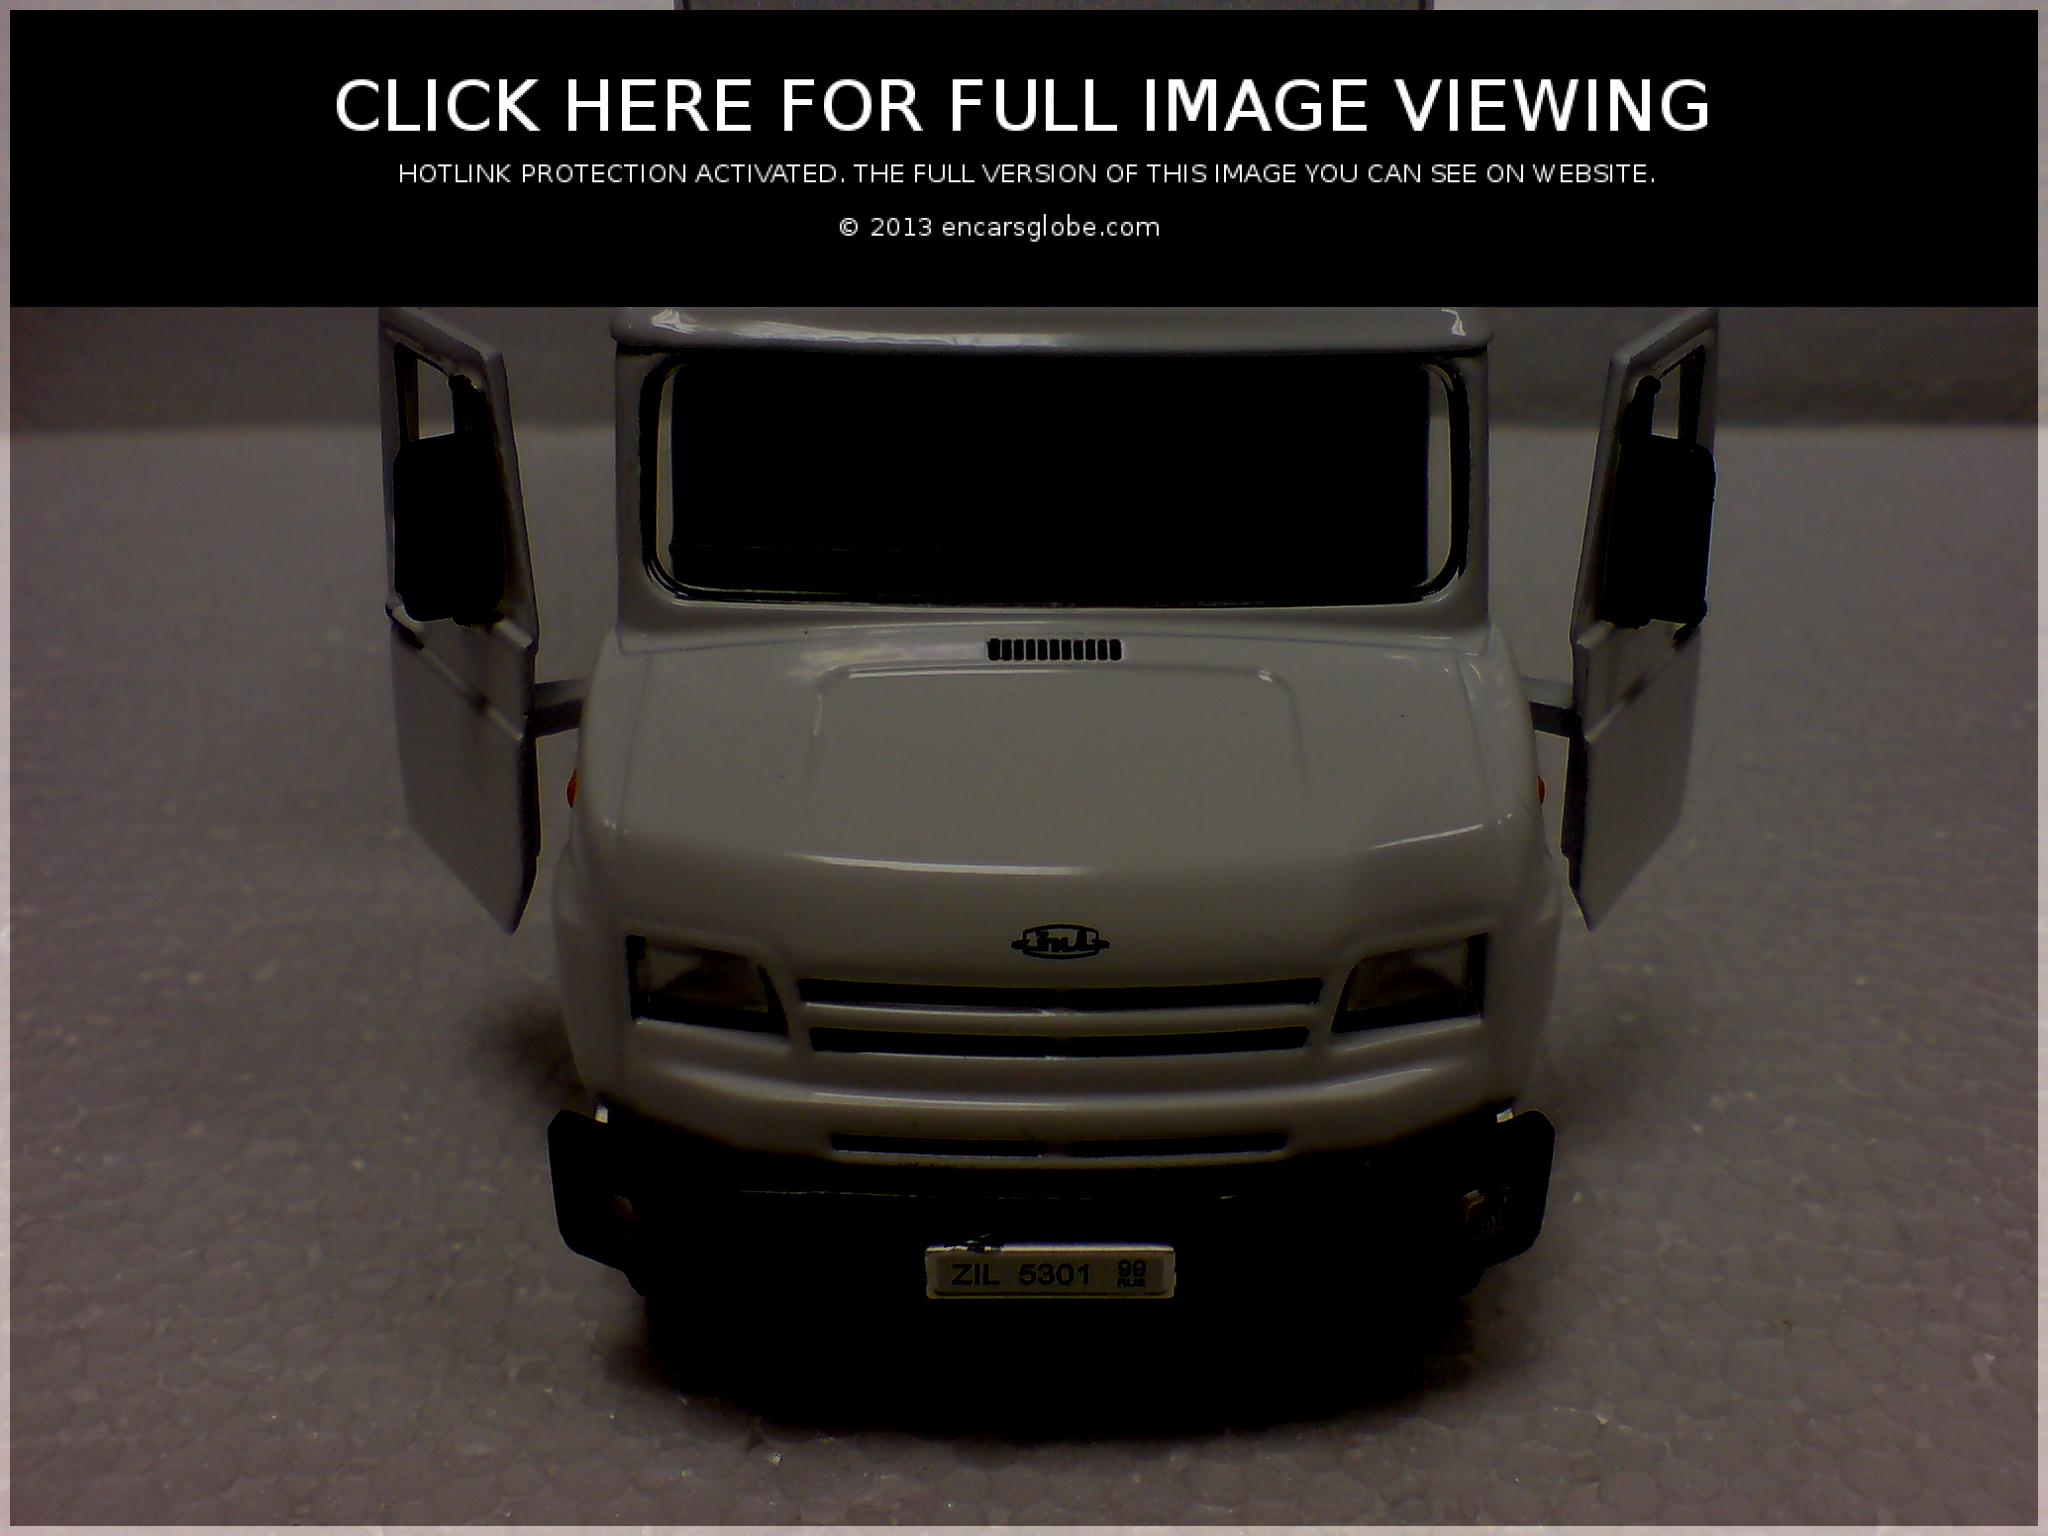 ZiL 5301 GA Photo Gallery: Photo #03 out of 12, Image Size - 512 x ...